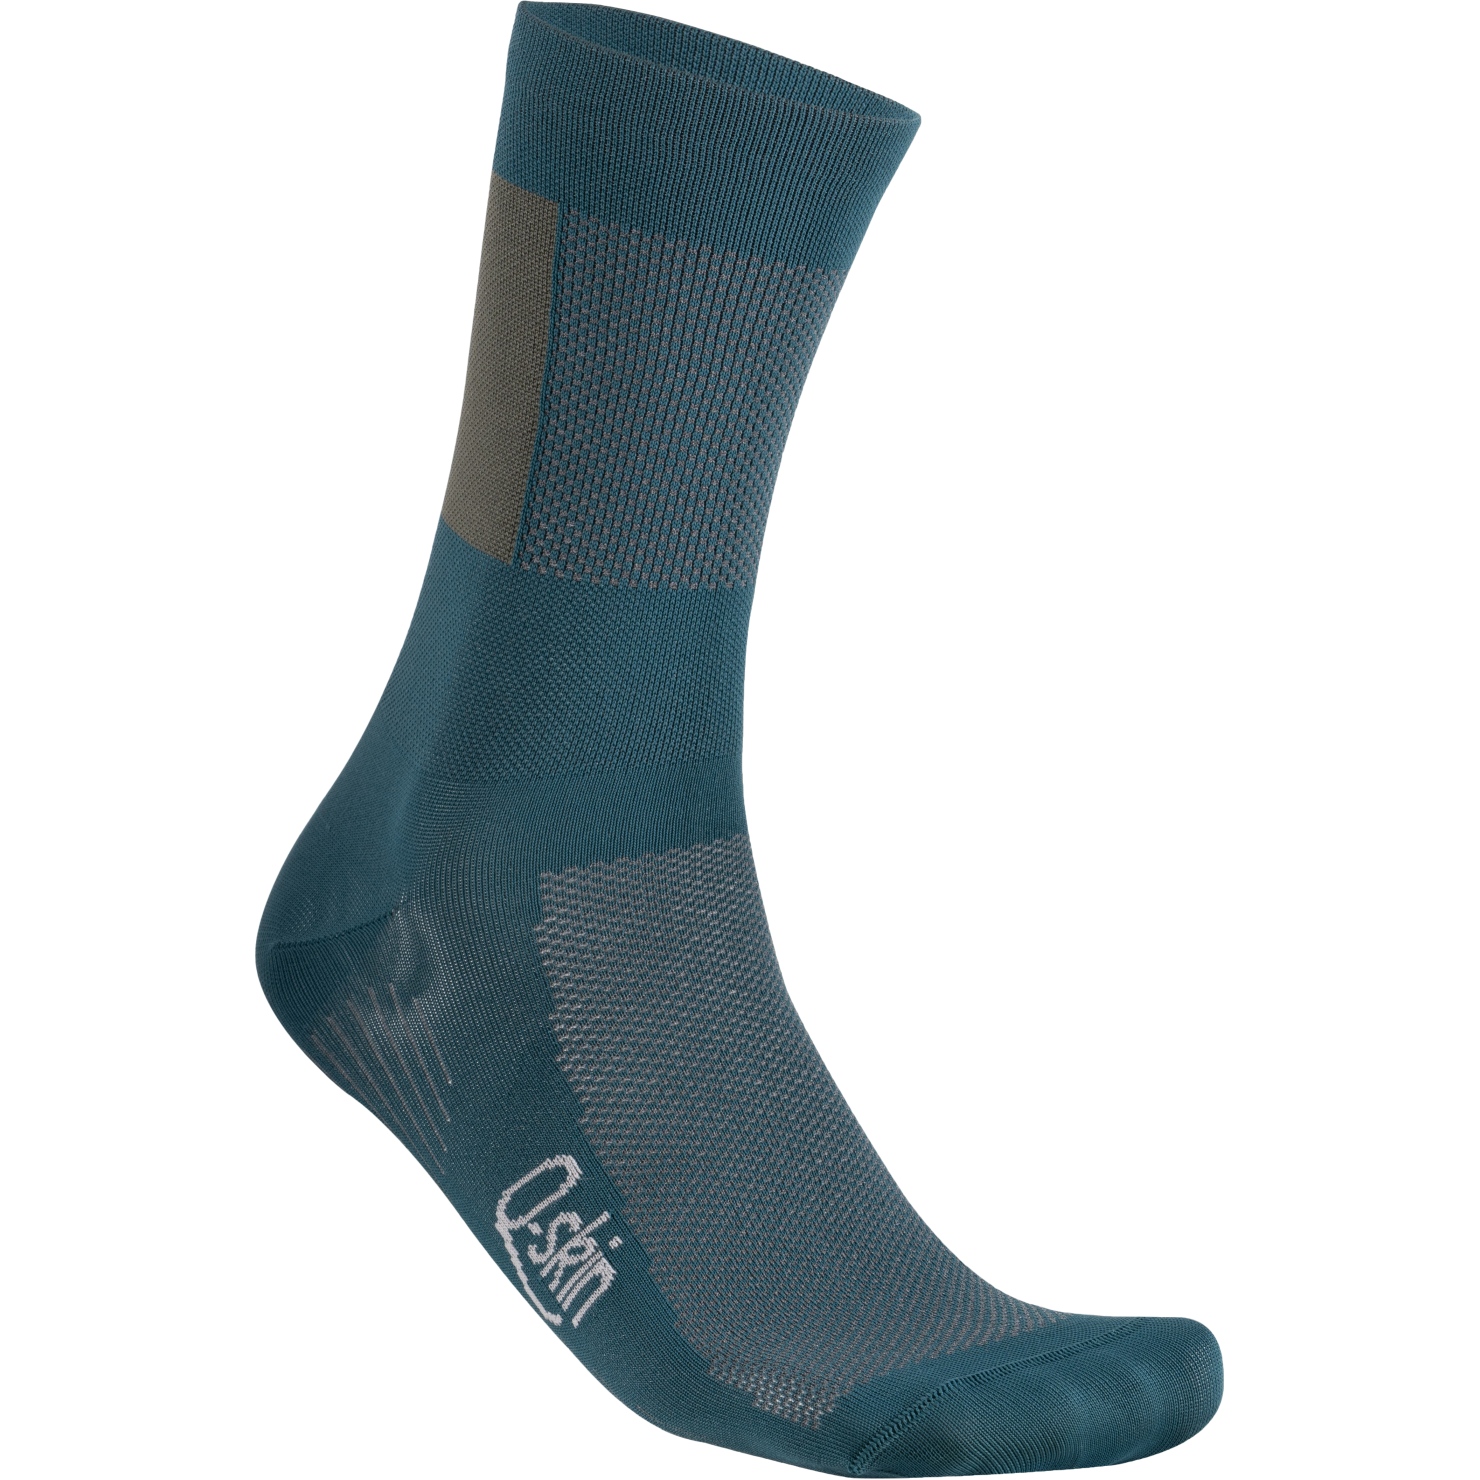 Picture of Sportful Snap Socks Men - 374 Shade Spruce